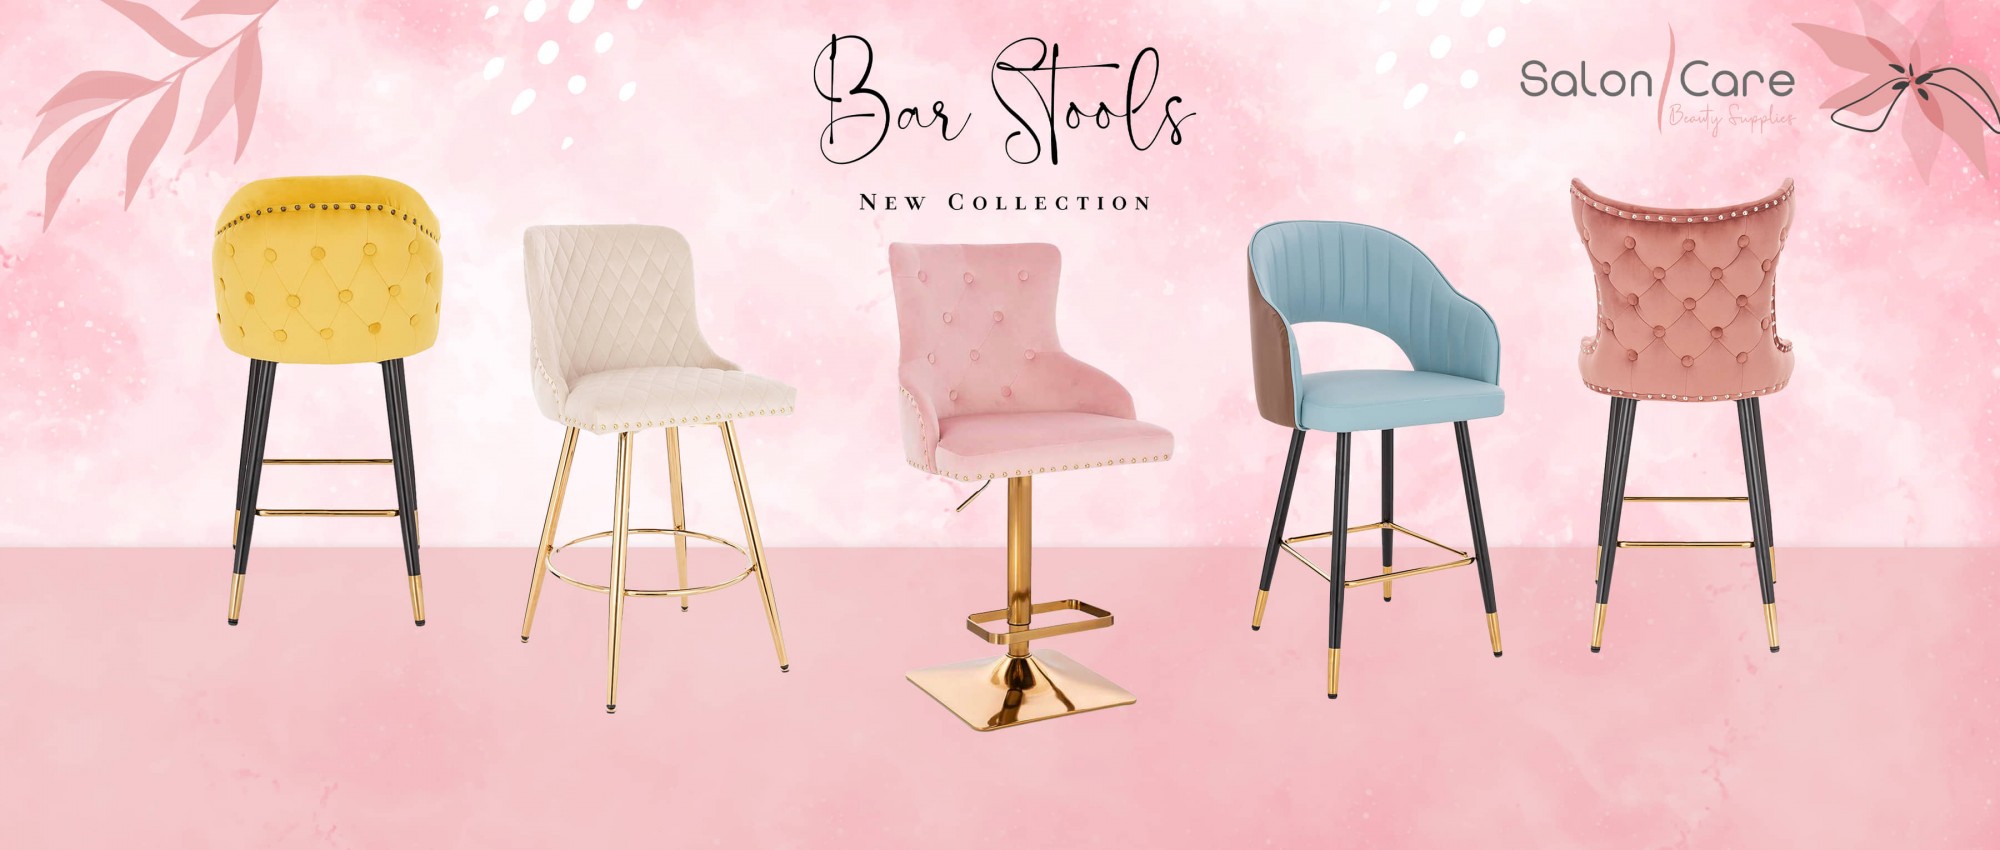 Bar_stool_New_Collection